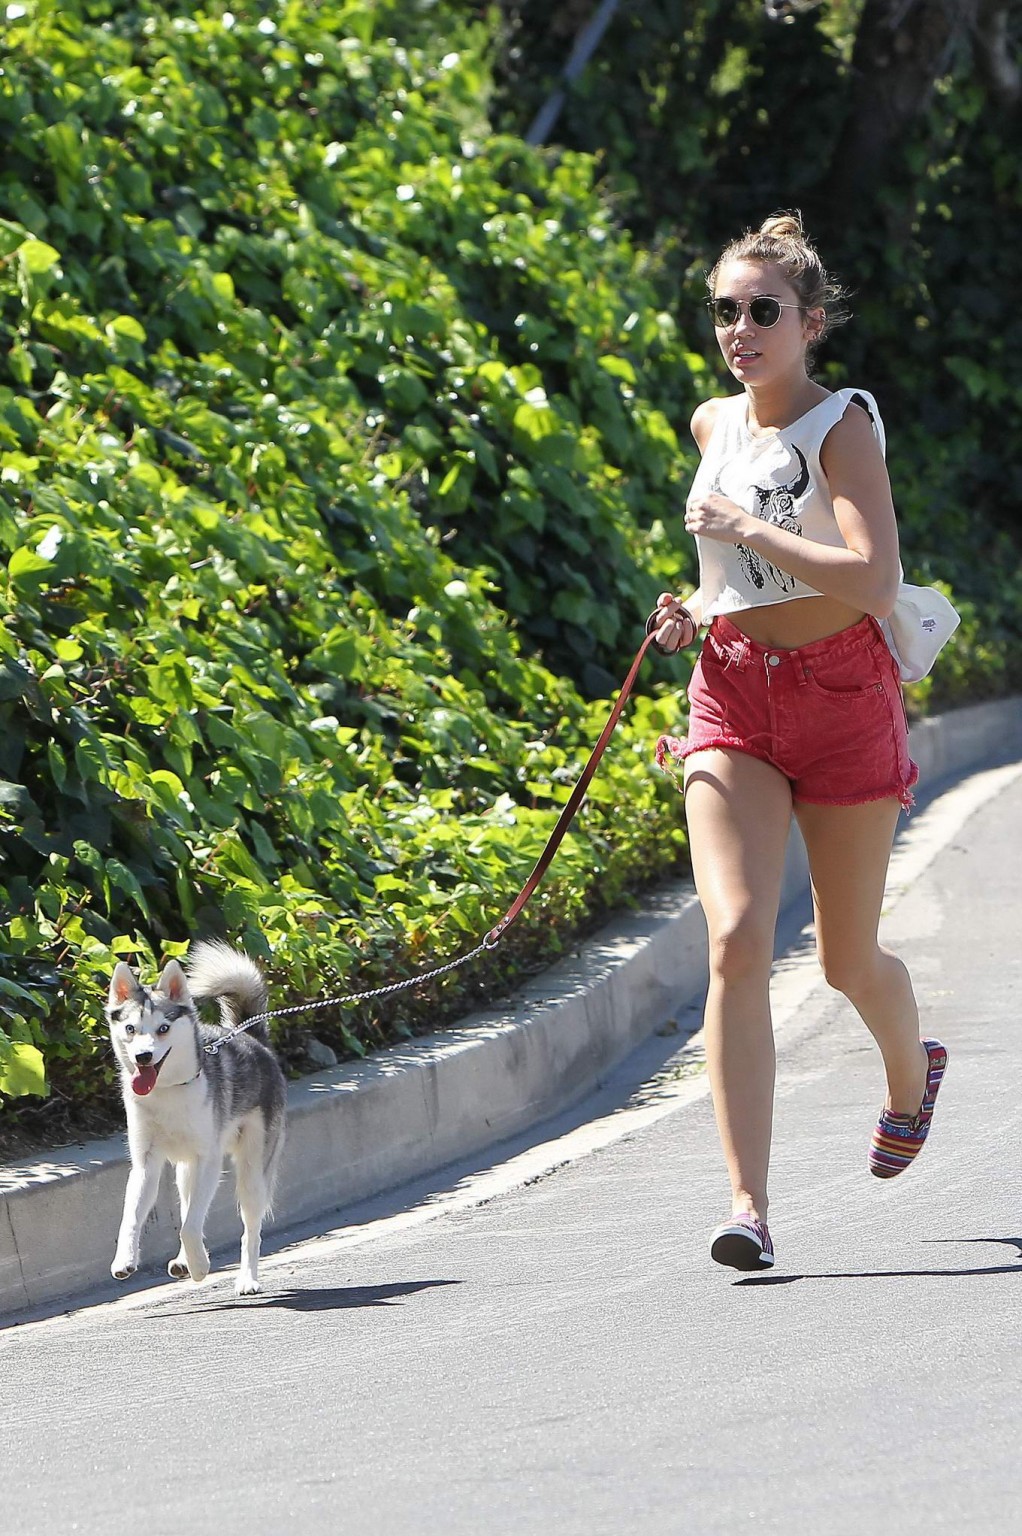 Miley Cyrus leggy running out her doggy wearing red hotpants in LA #75271559